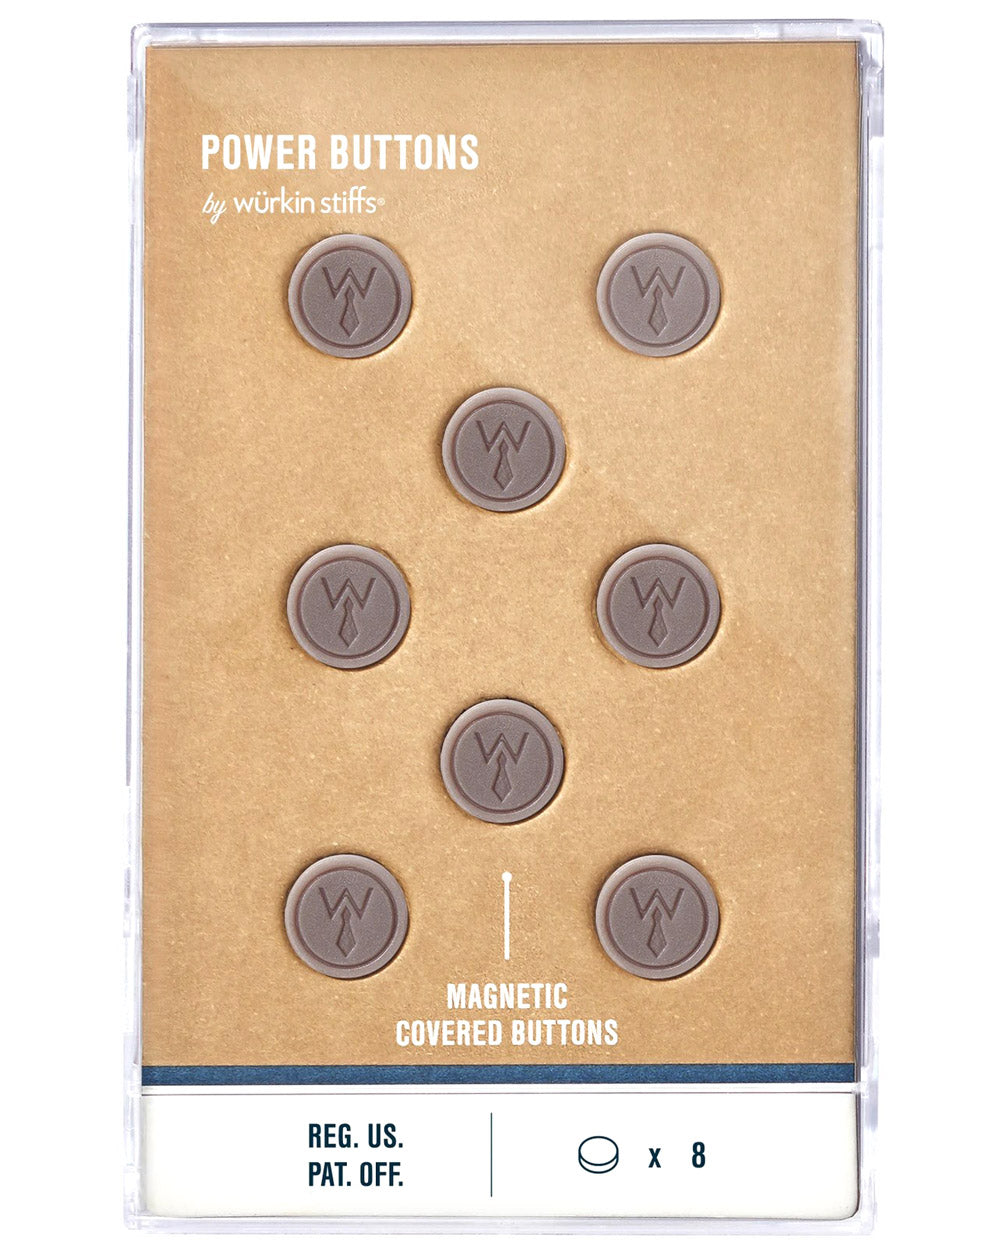 Grey Plastic Covered Magnetic Power Buttons